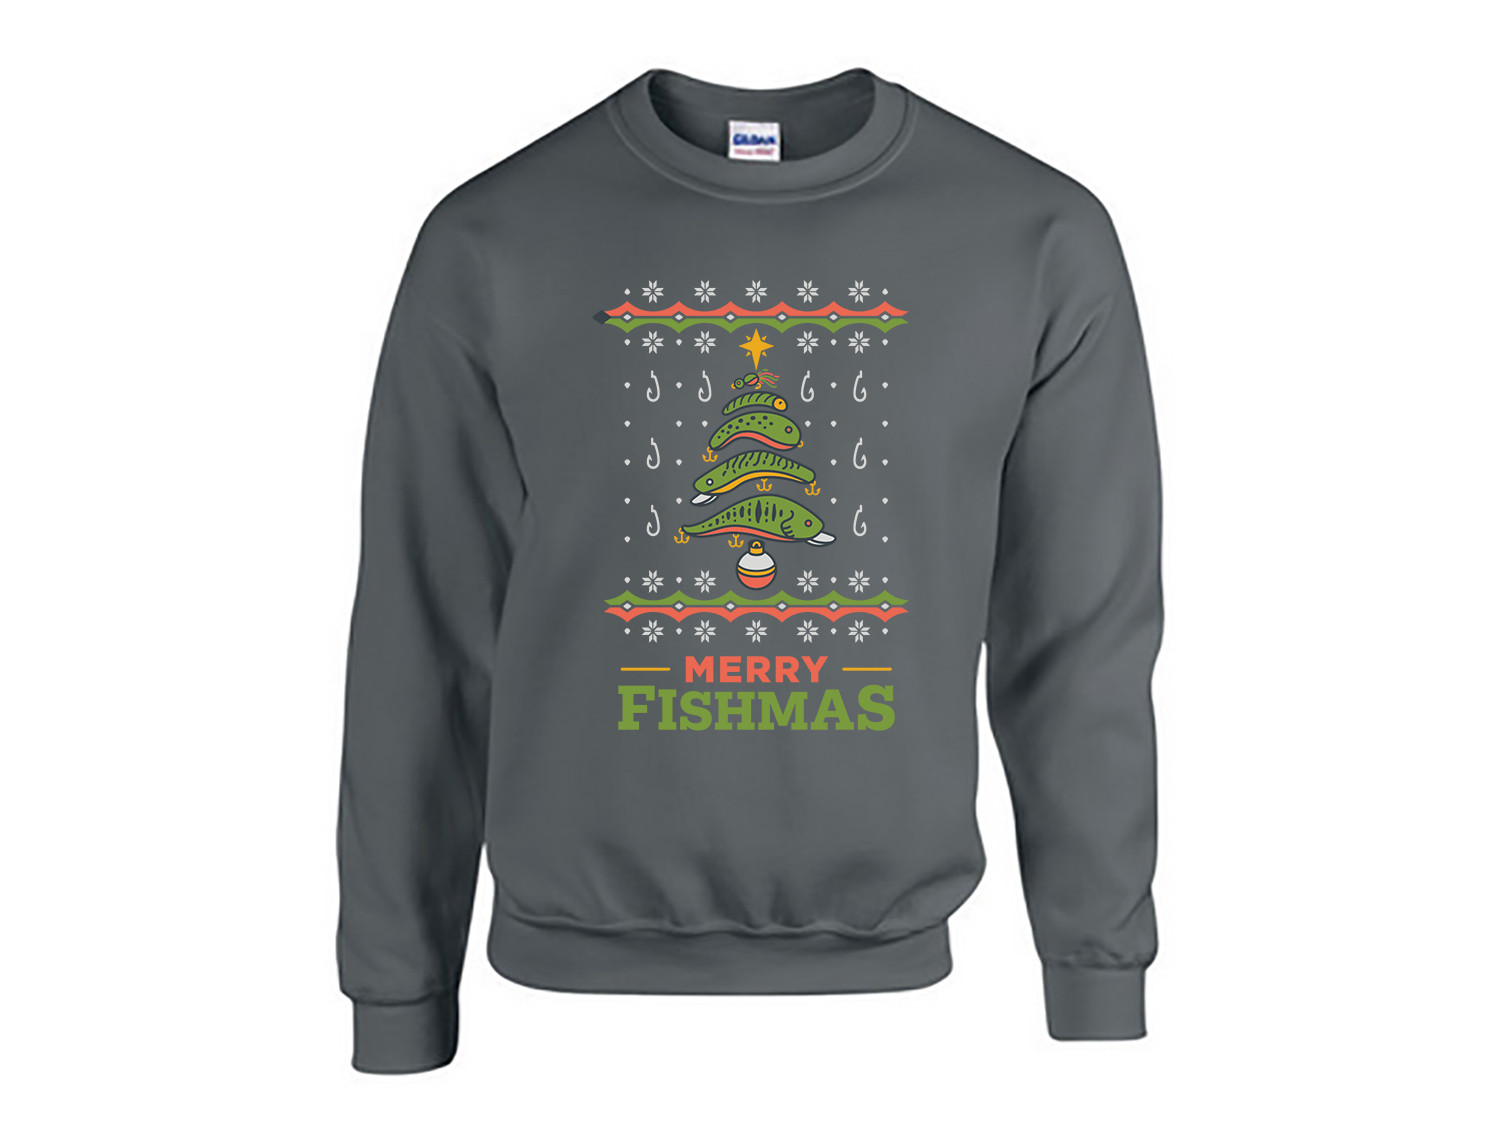 Fishing Merry Fishmas Sweater Christmas 3D Printed Mens Pullover Casual  Sweatshirt Couple Long Sleeve Shirts Unisex Female Tops